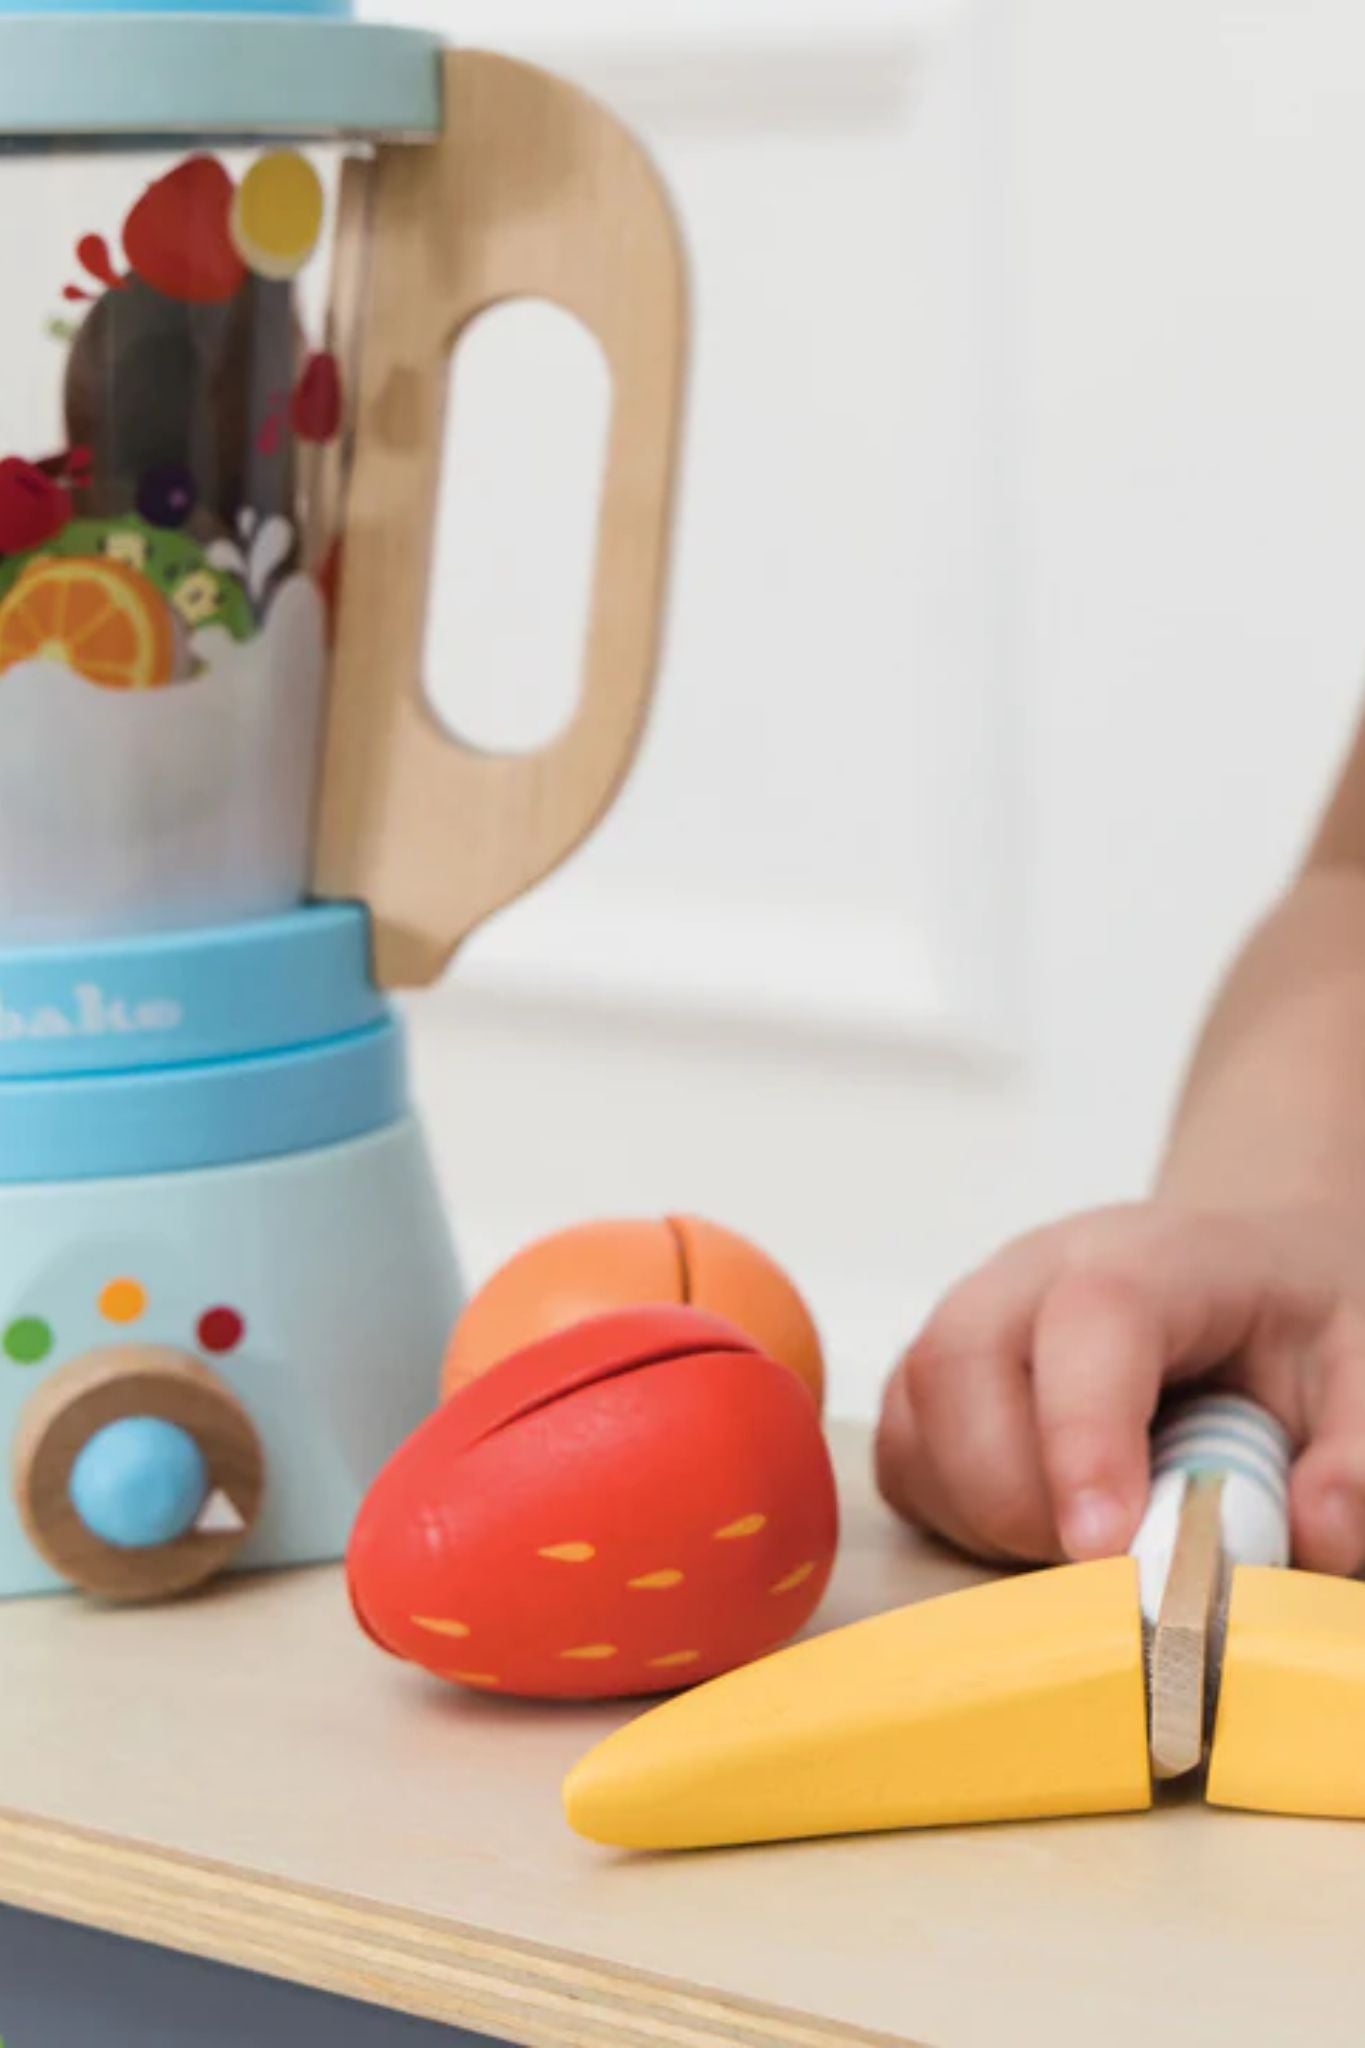 Toy Blender with Fruit